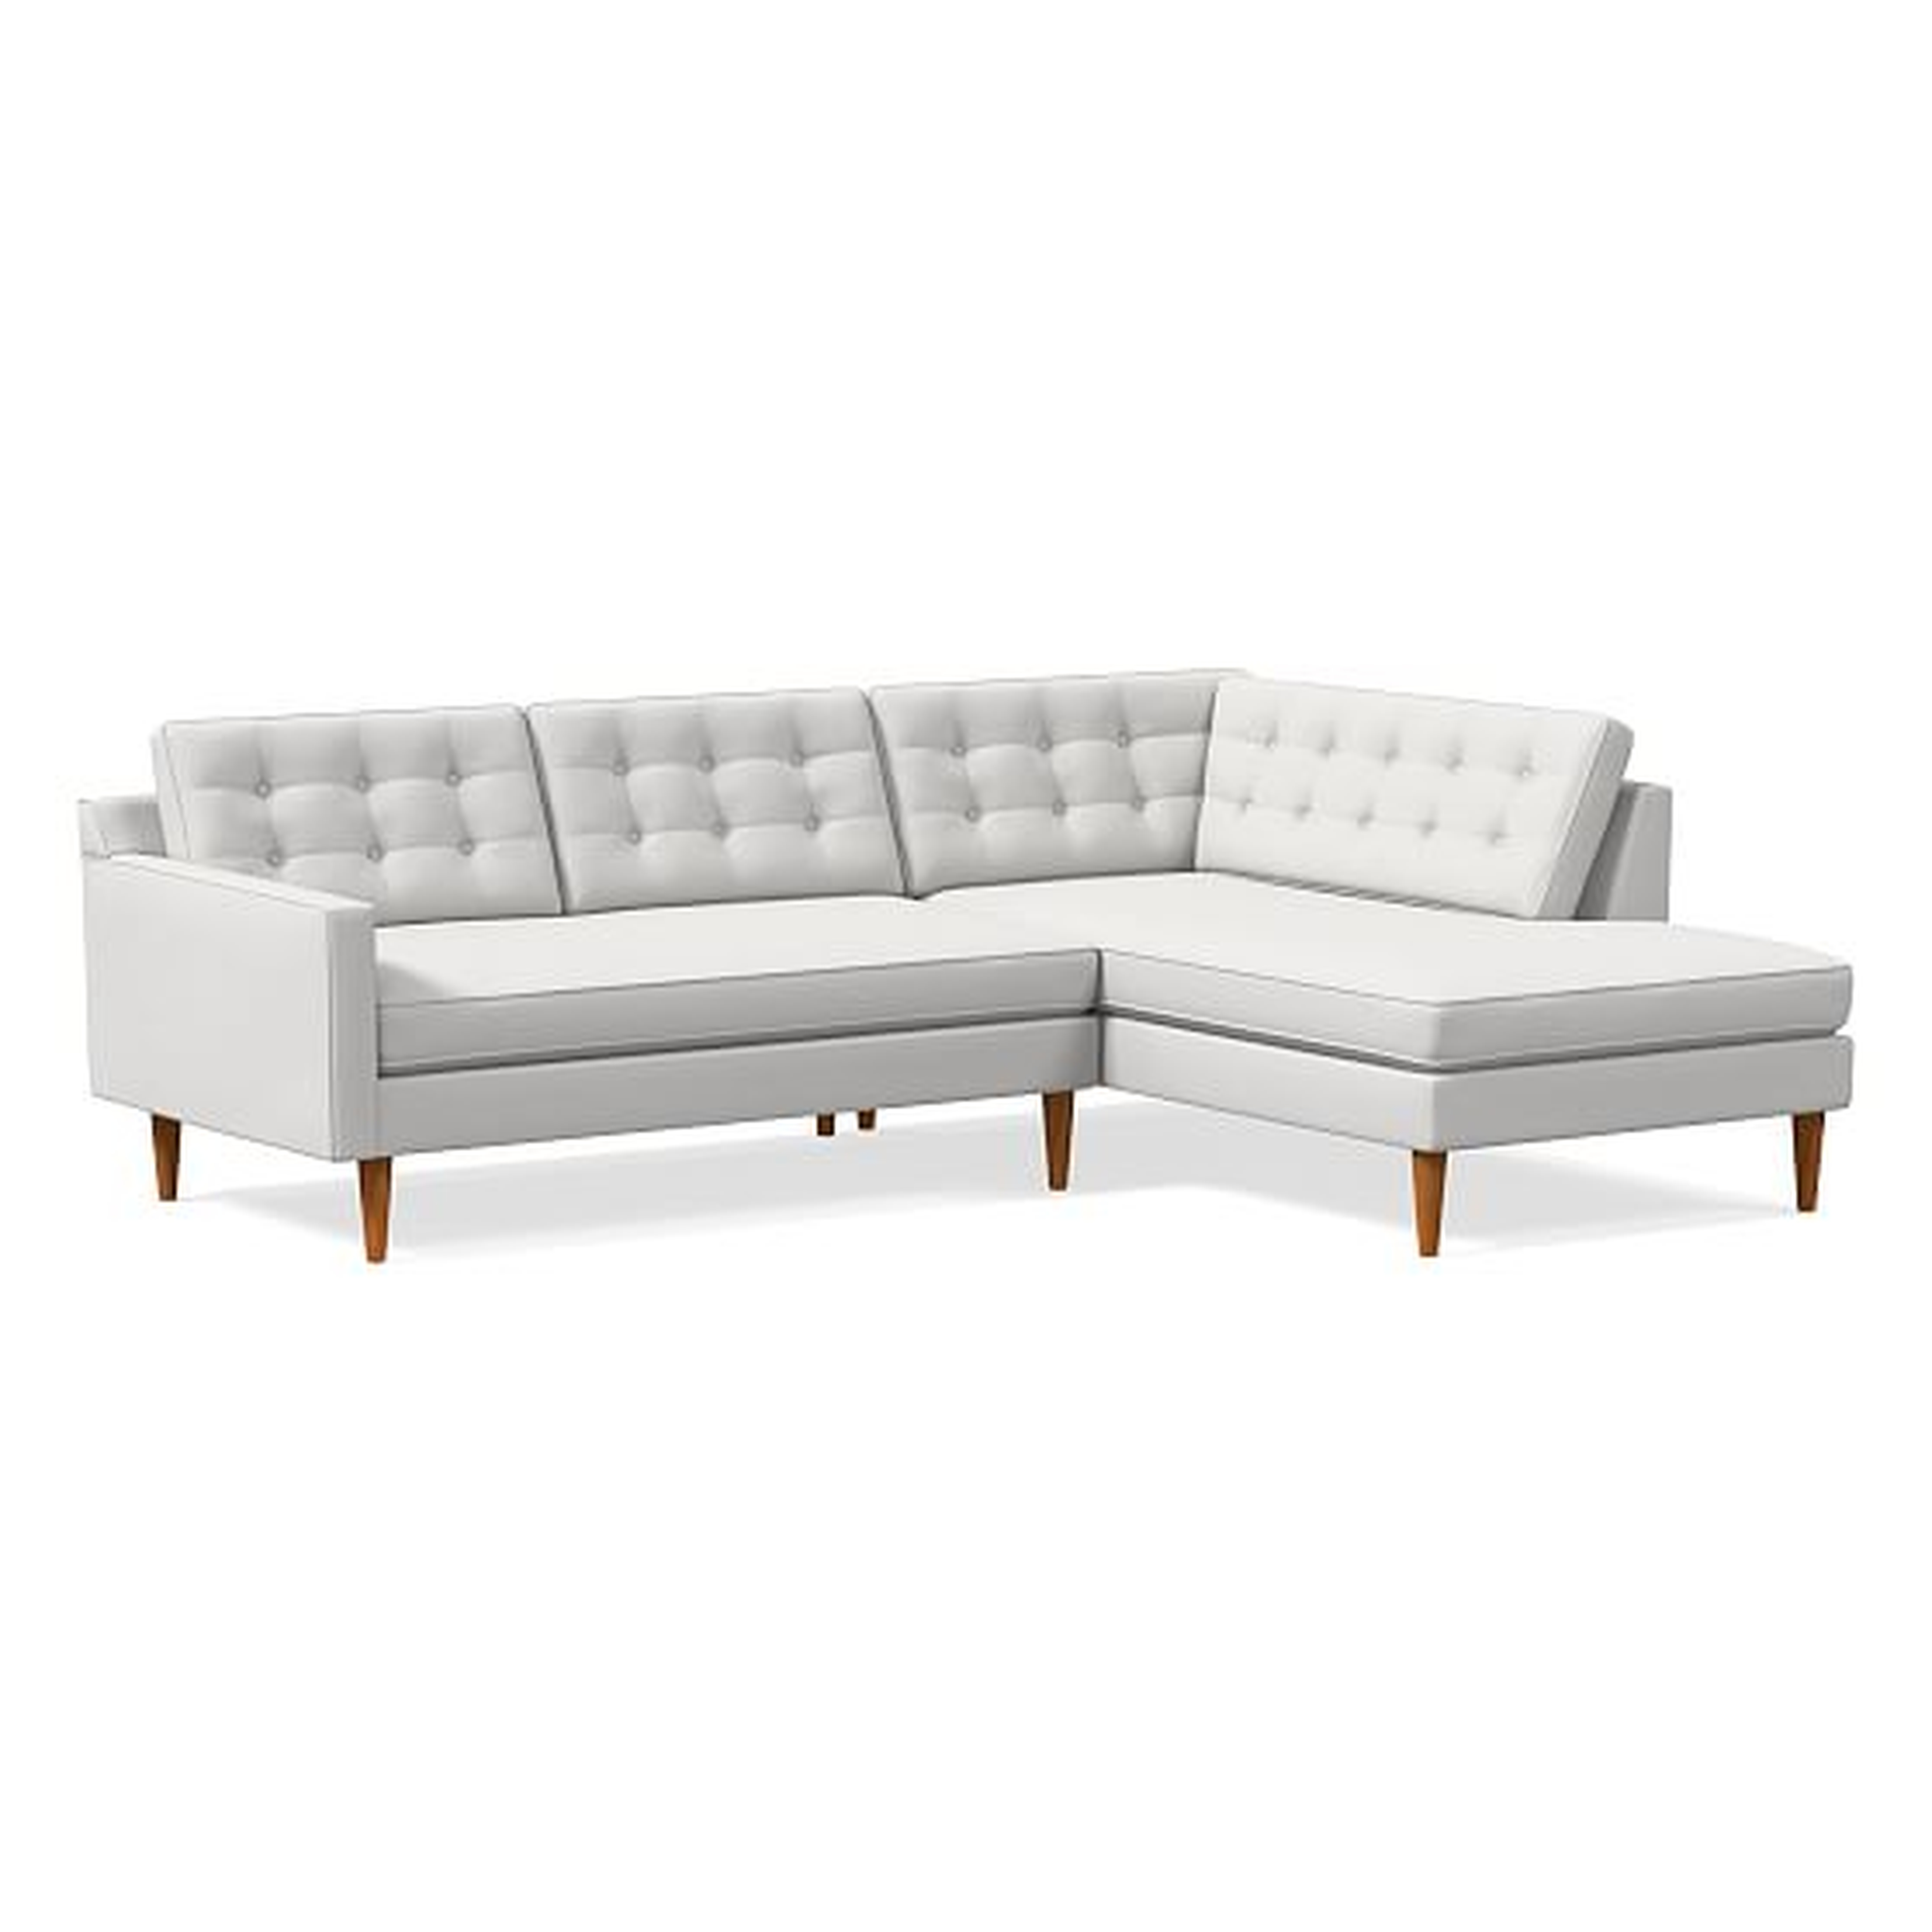 Drake Midcentury 2-Seat Left Arm 2-Piece Terminal Chaise Sectional, Performance Washed Canvas, Stone White, Pecan - West Elm